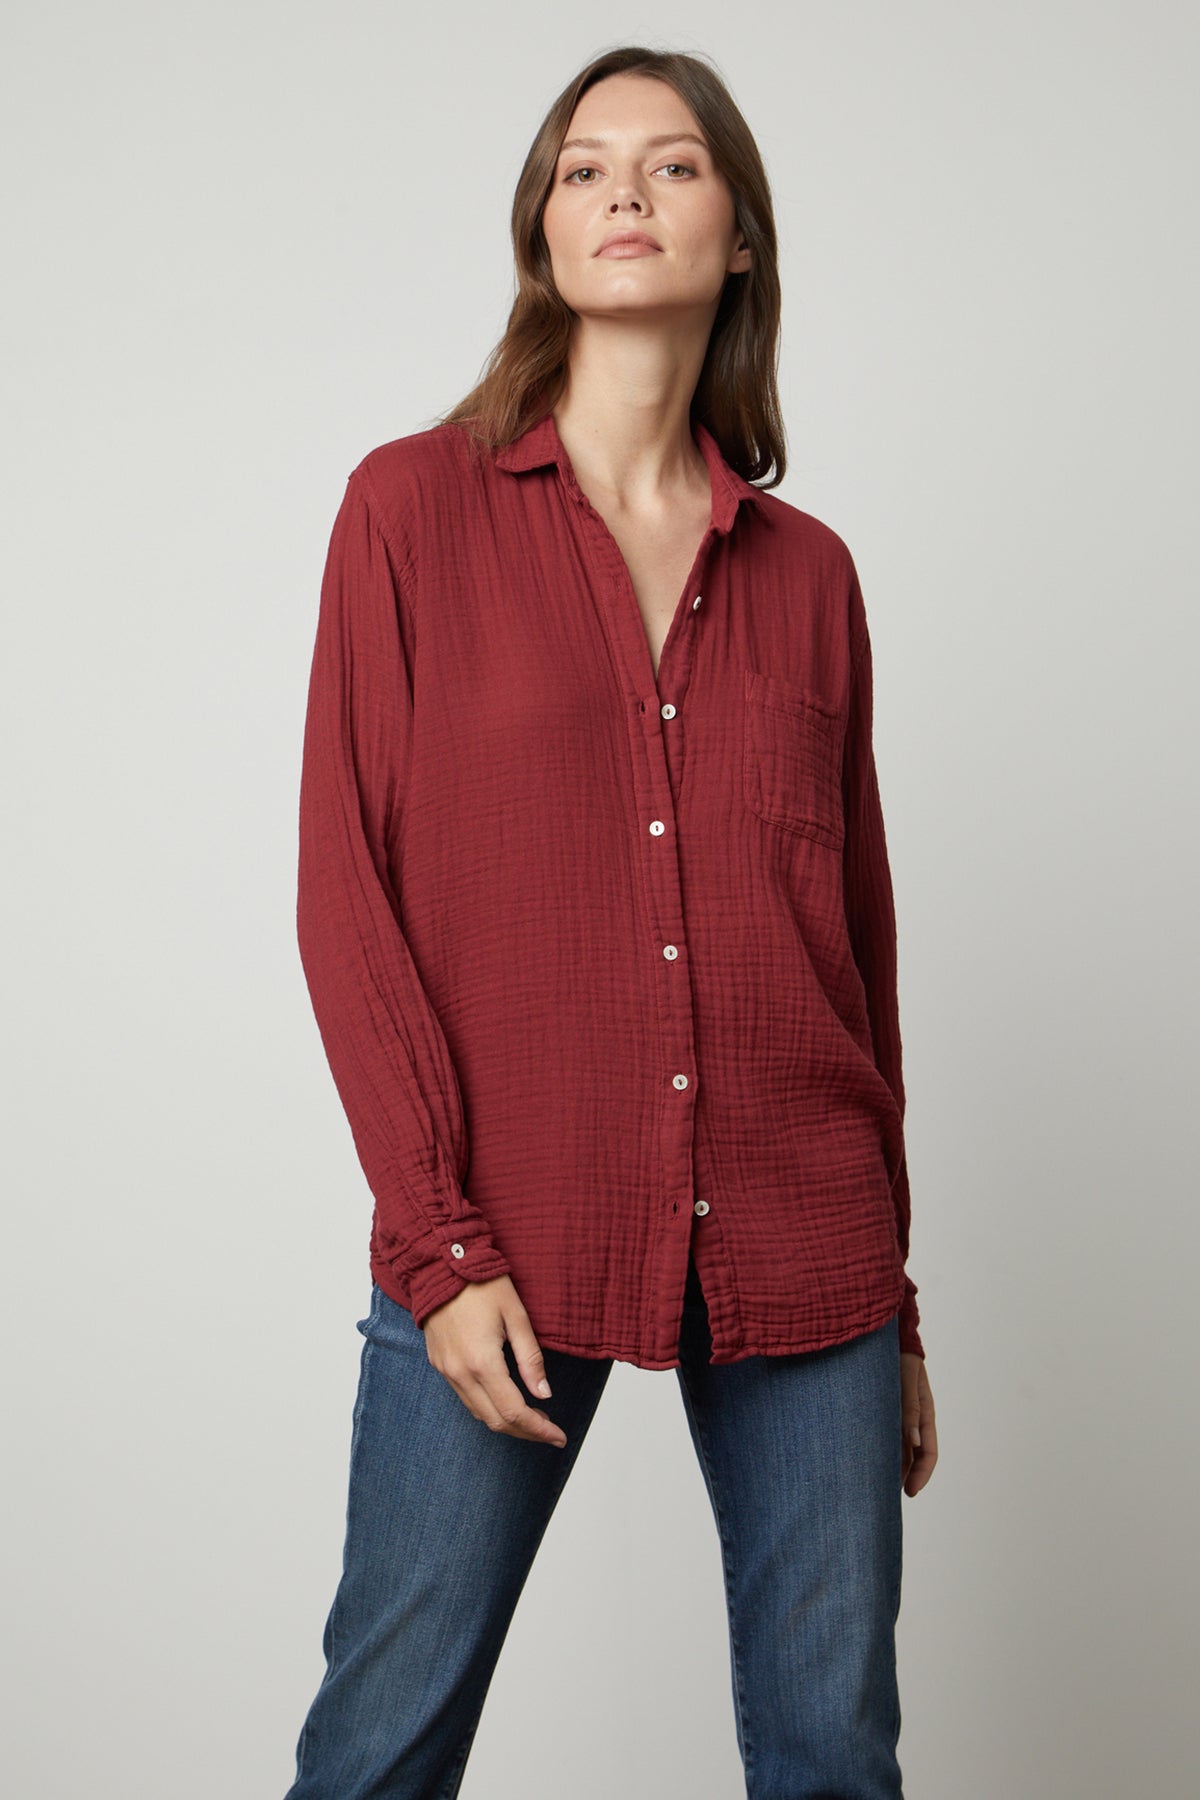   The model is wearing a Velvet by Graham & Spencer MARGO COTTON GAUZE BUTTON-UP SHIRT. 